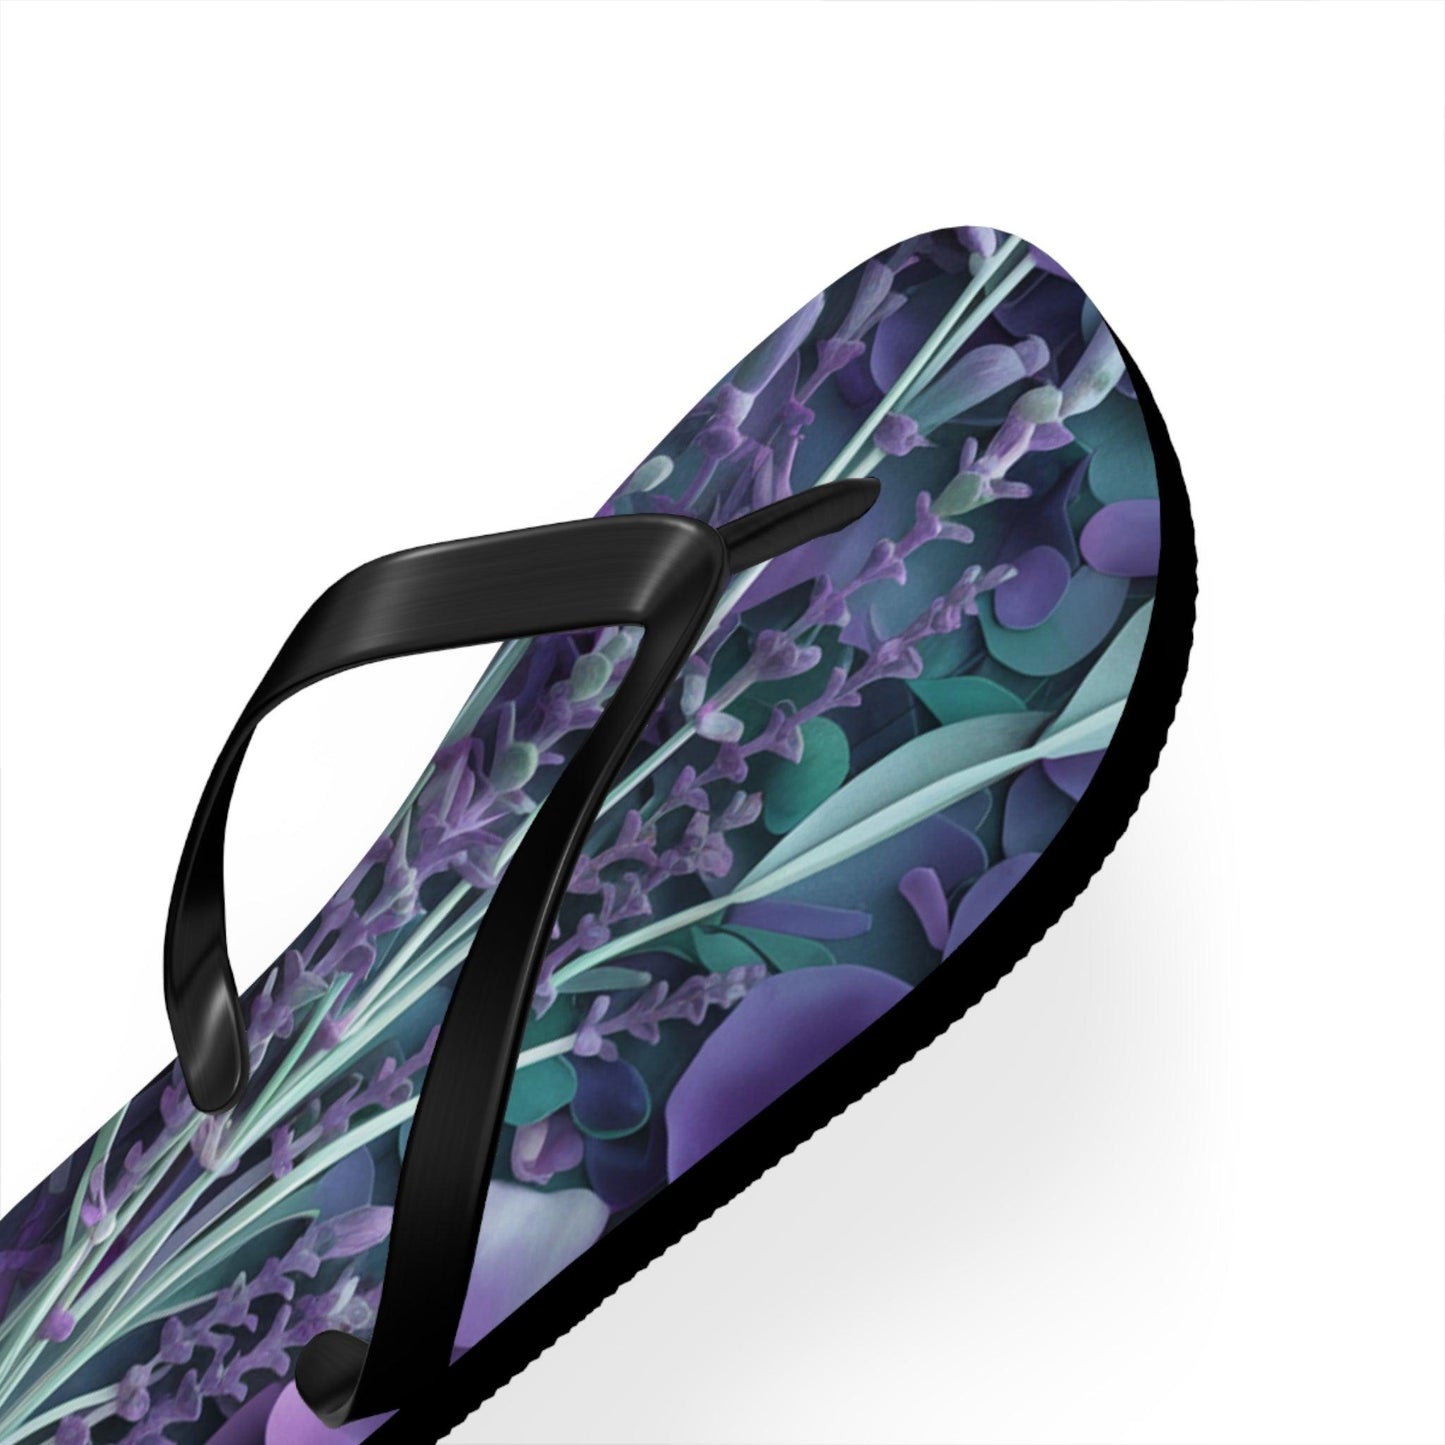 Lavendar Inspired Flip Flops, Express Your Beach Loving Self - Coastal Collections